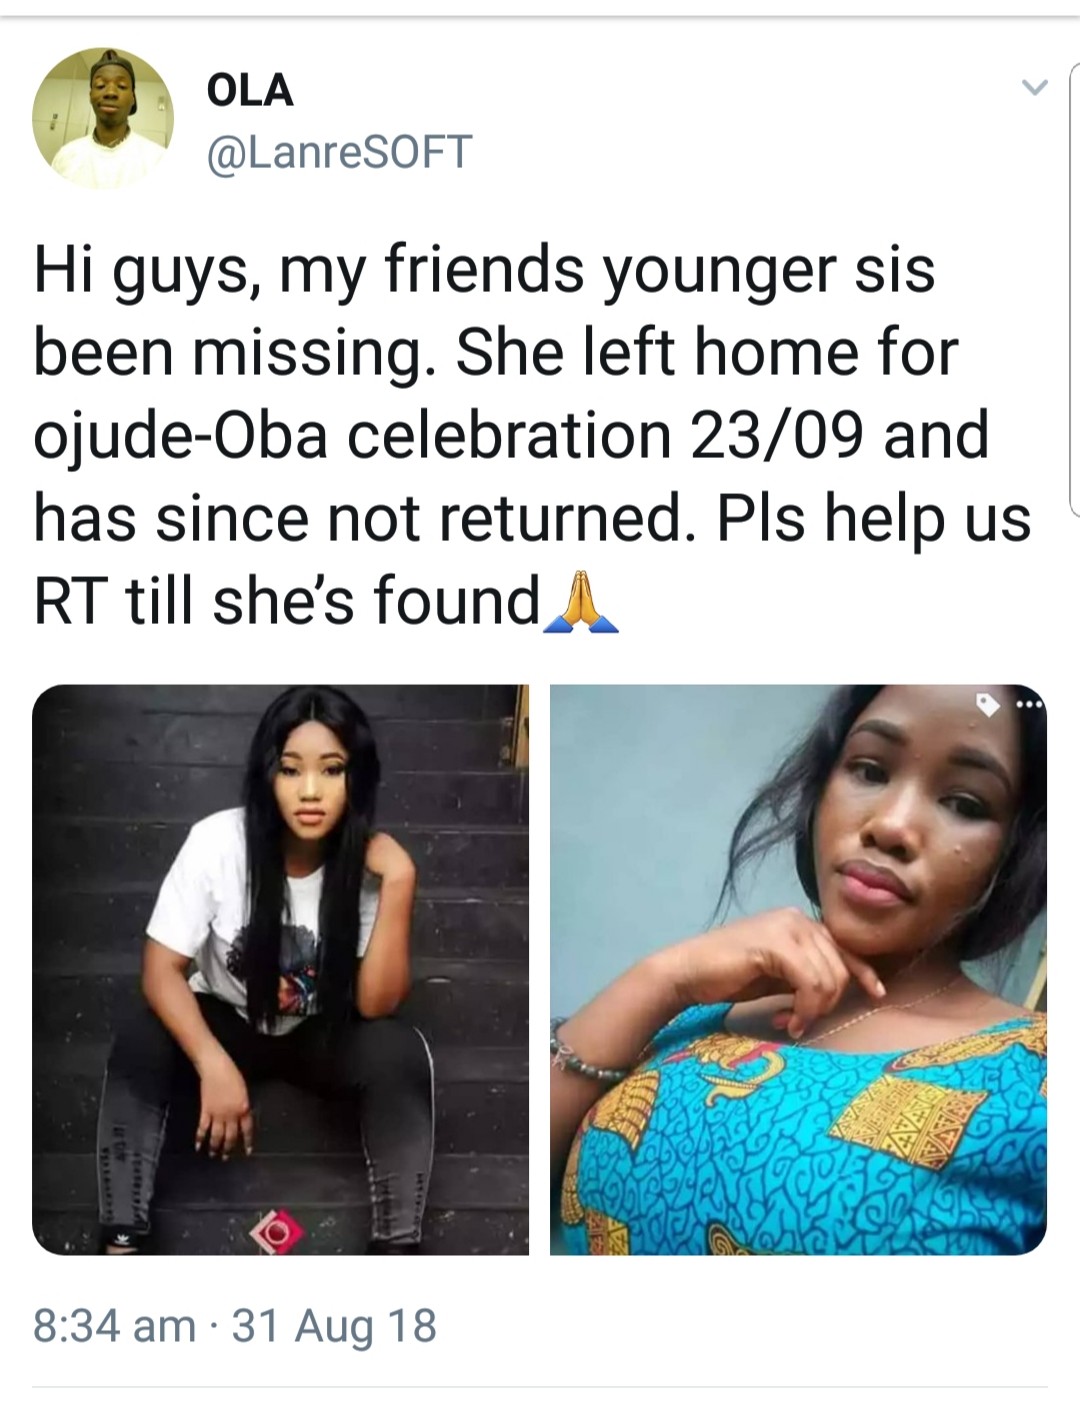 Photos: Young lady who left home for Ojude-Oba festival in Ogun state since August 23rd declared missing 